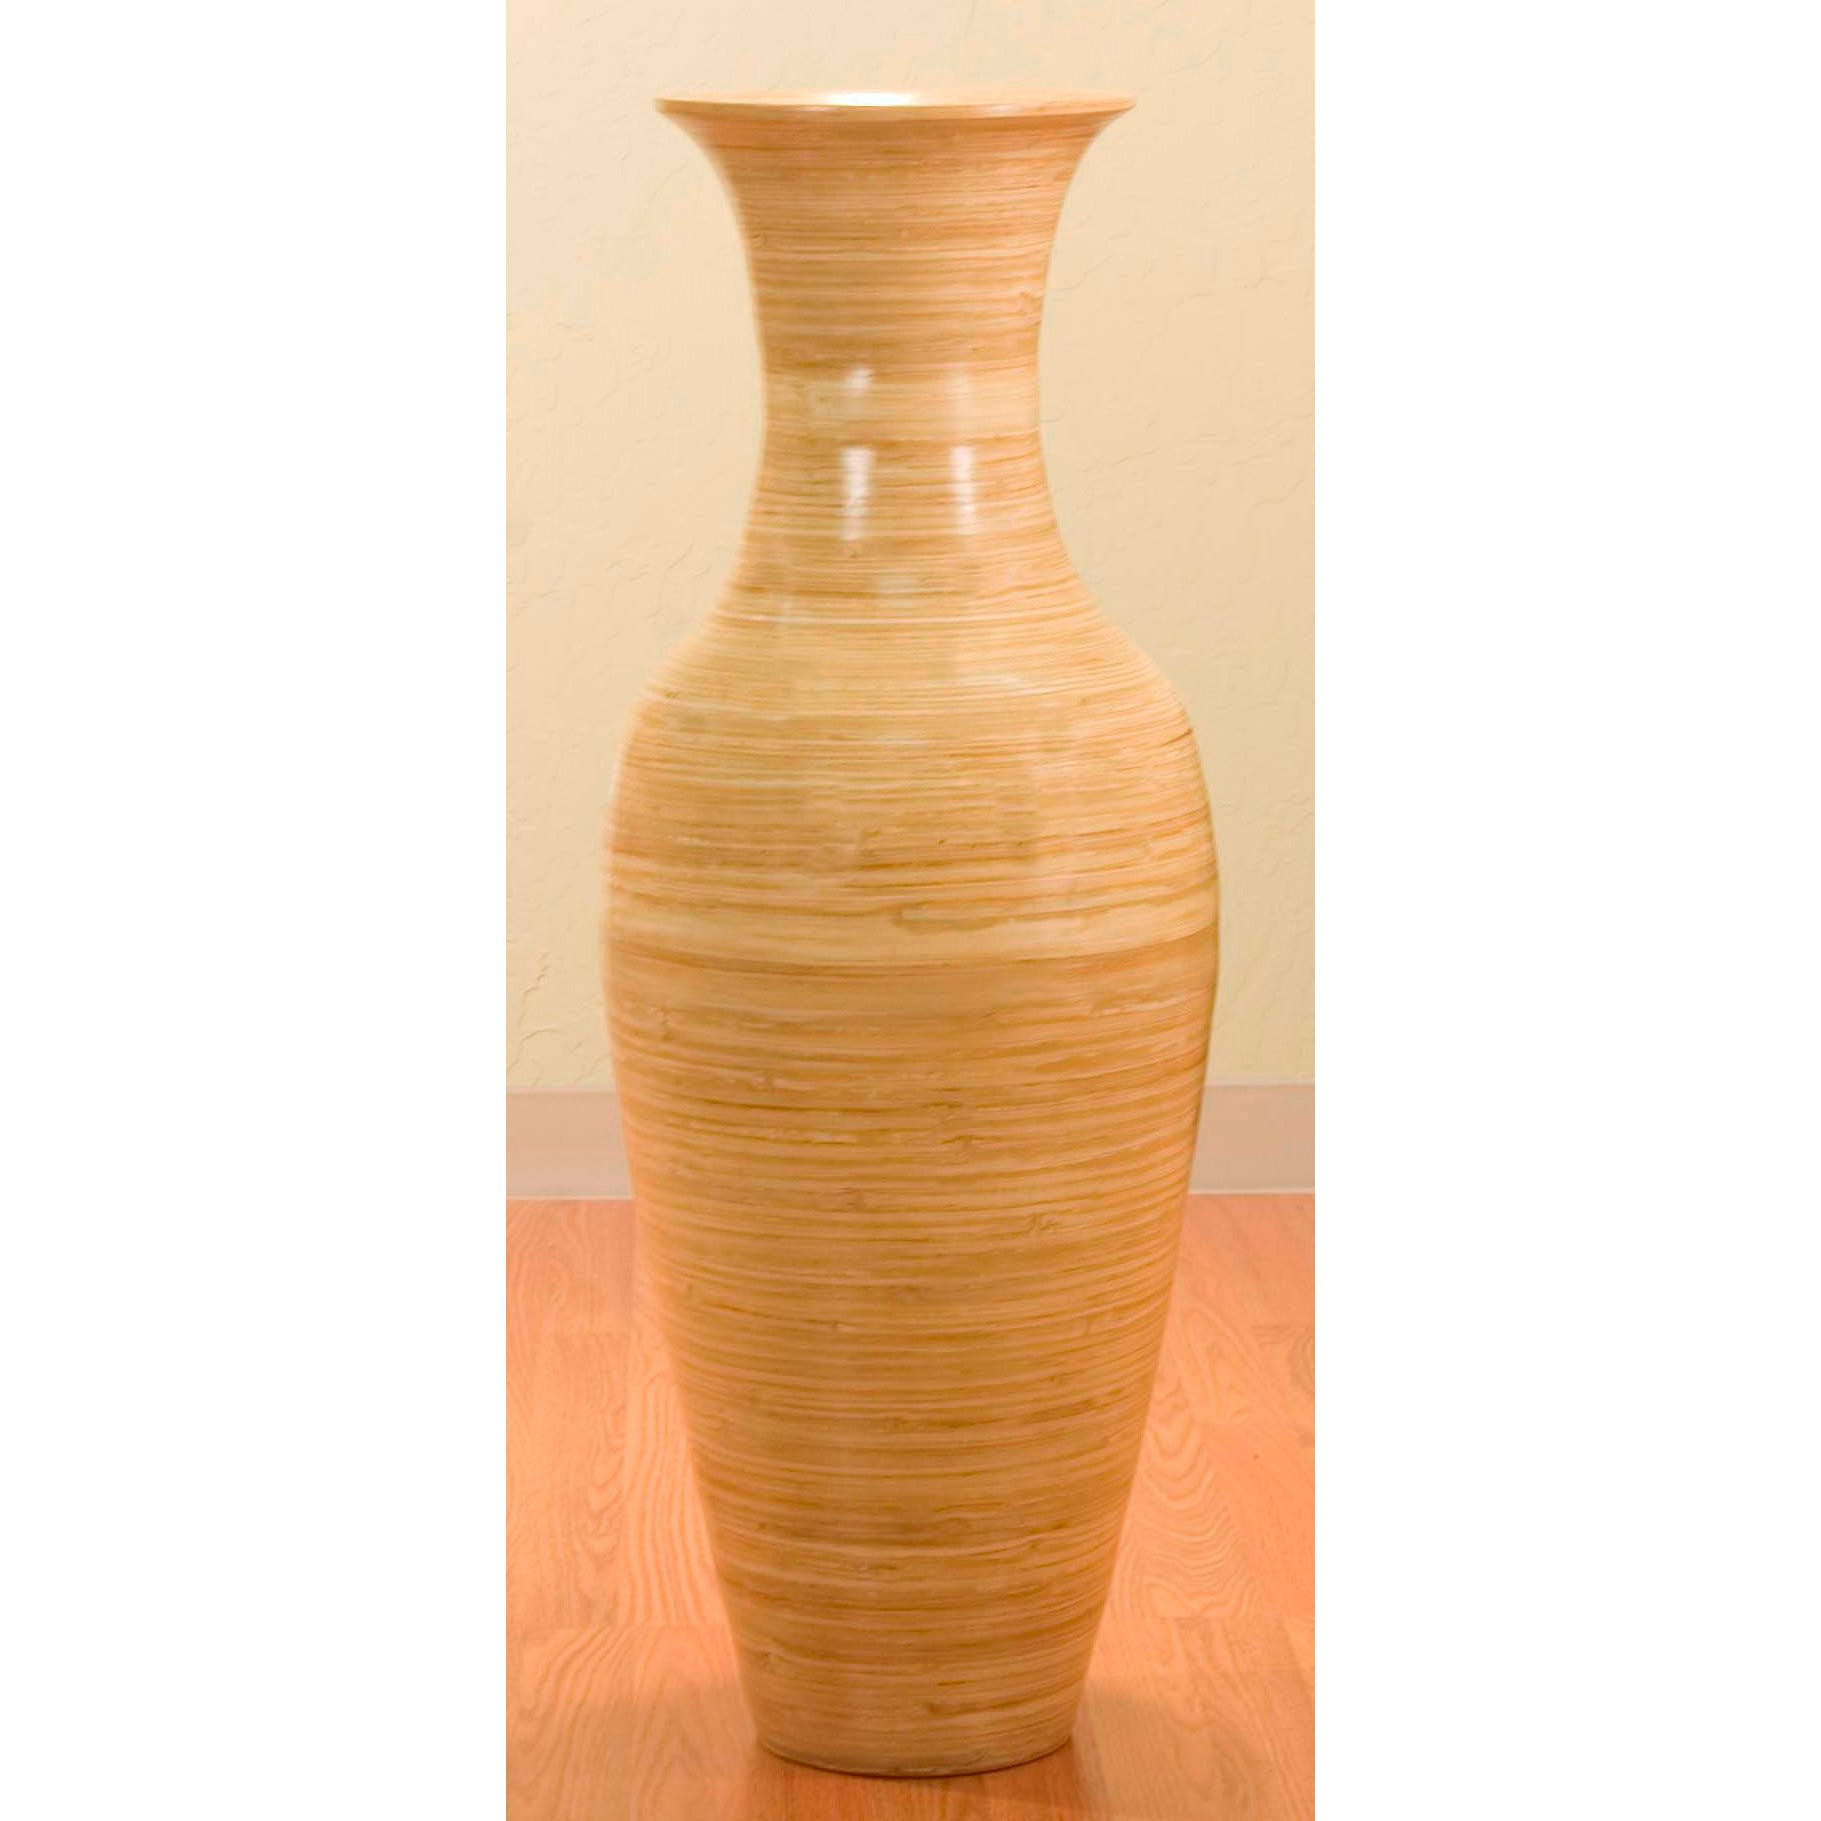 spun bamboo vase of shop 36 inch bamboo tall floor vase free shipping today pertaining to shop 36 inch bamboo tall floor vase free shipping today overstock com 2580805